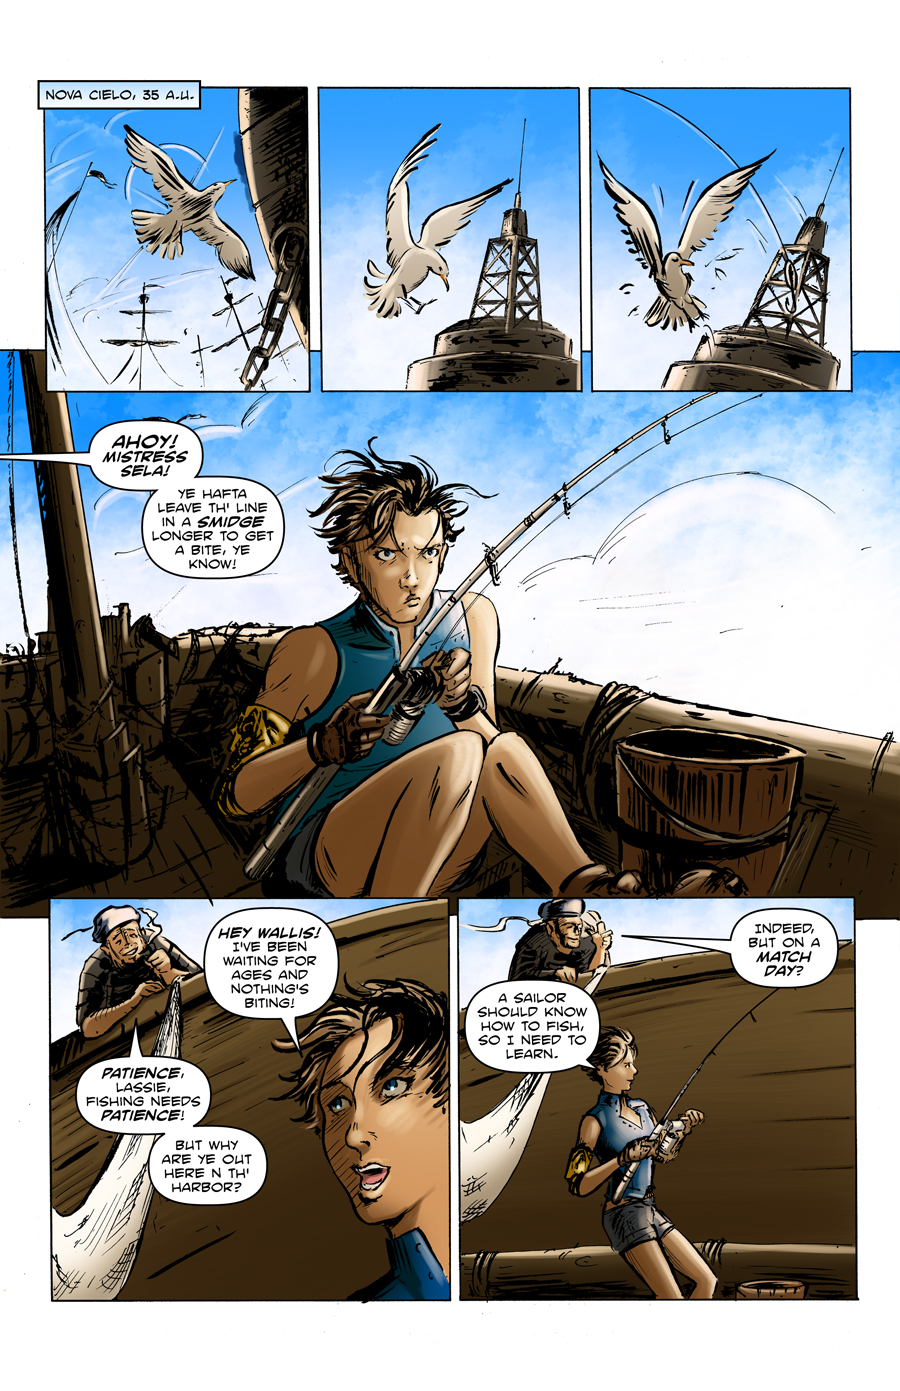 Cannons in the Clouds Preview Page